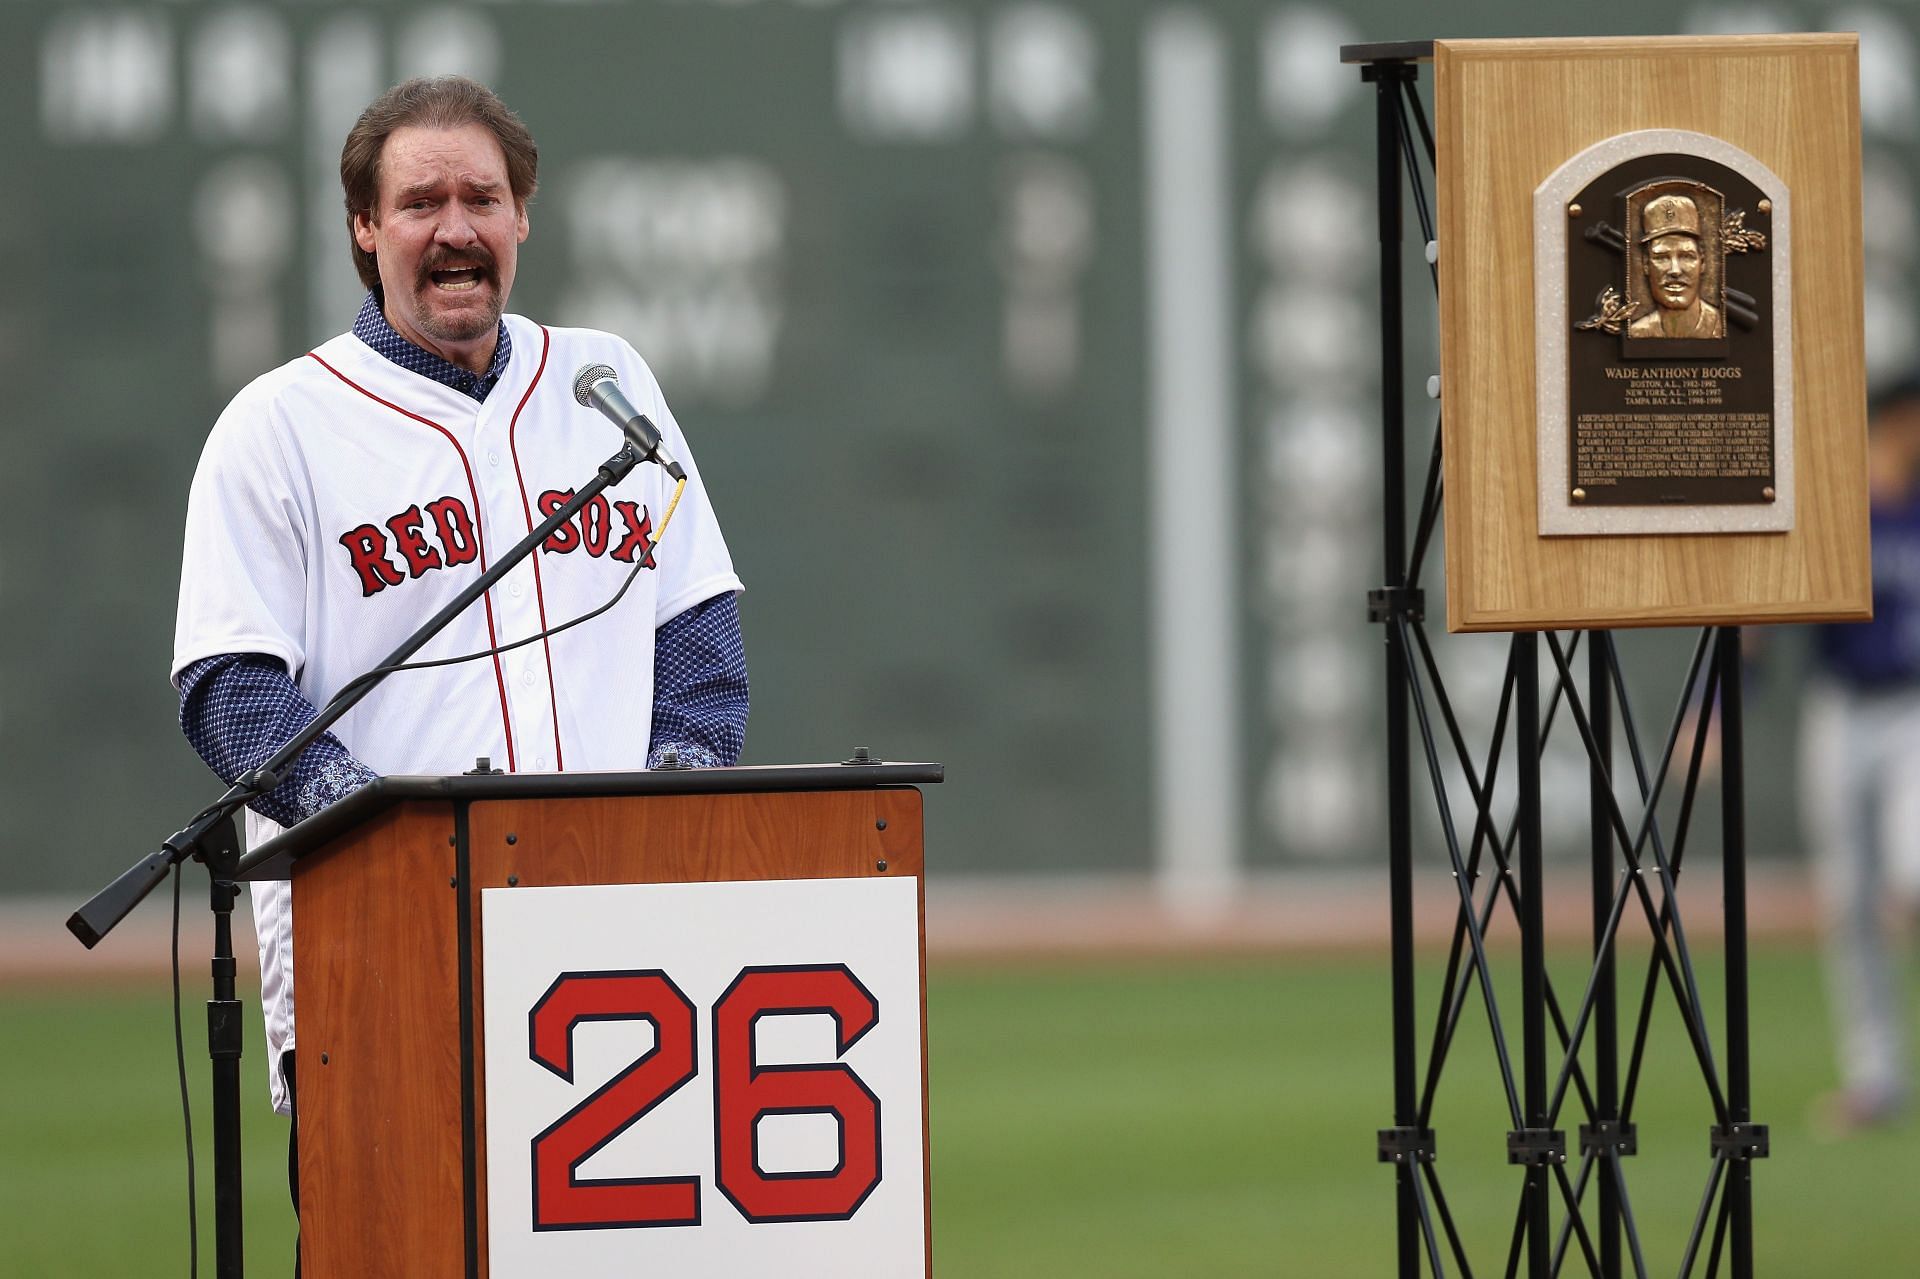 Boston Red Sox legend Wade Boggs